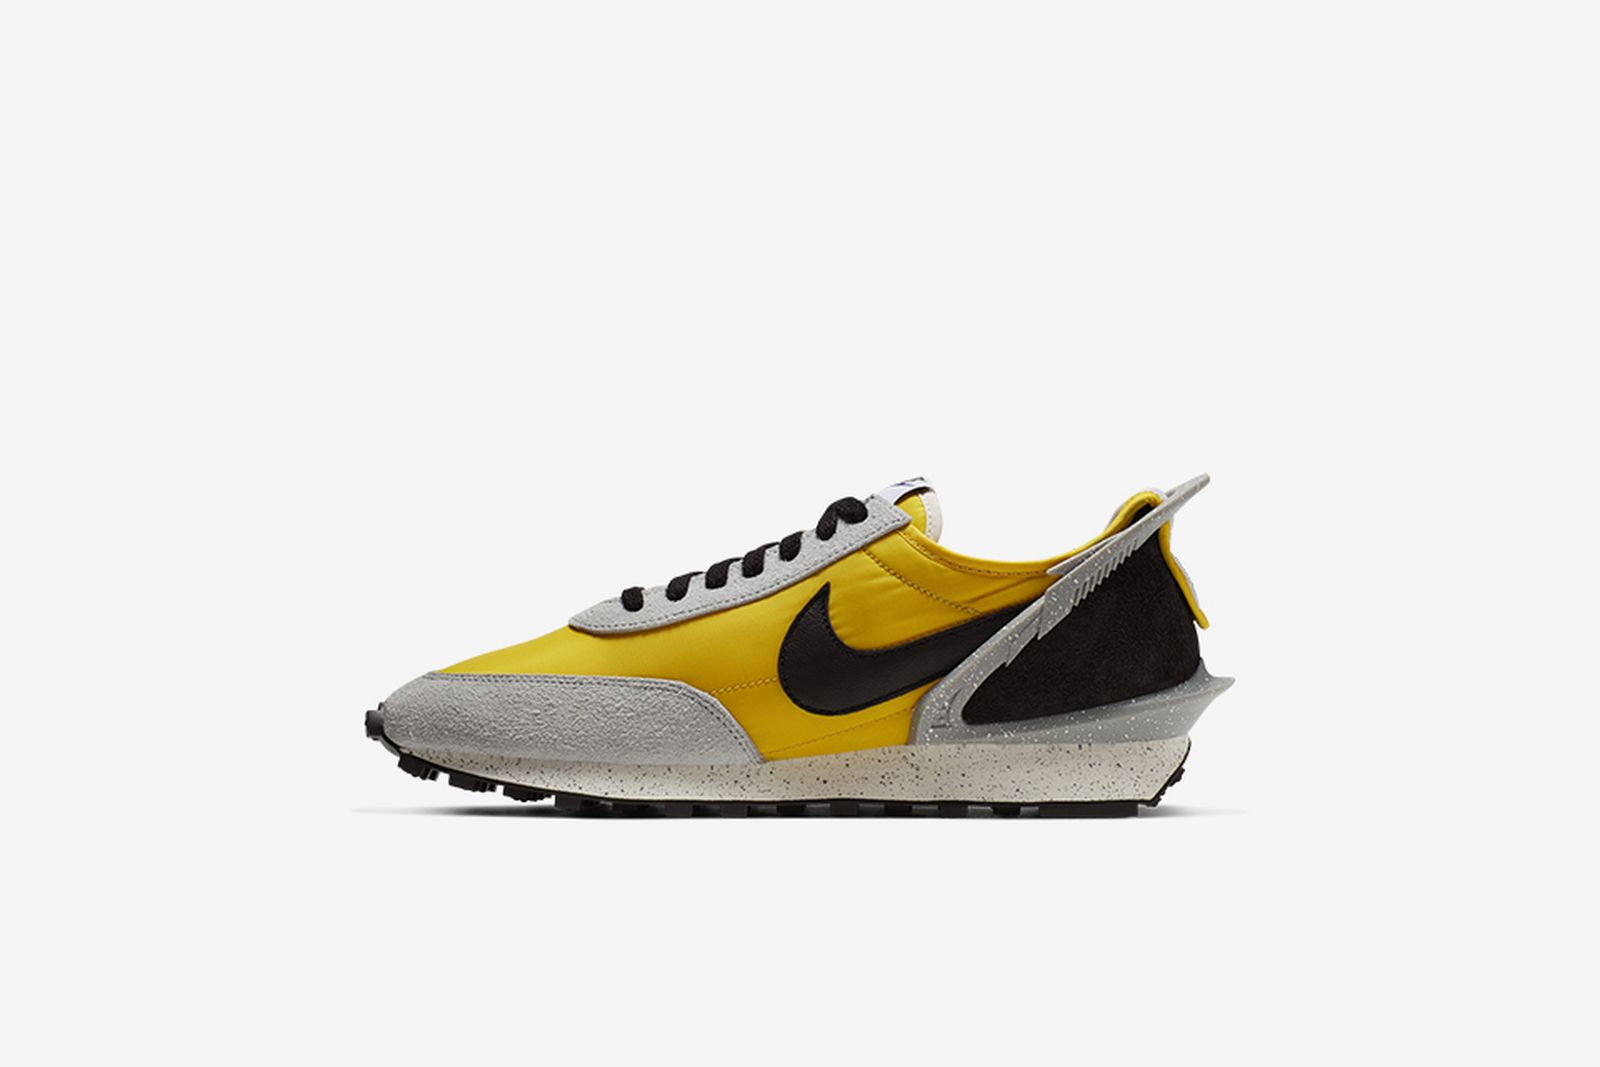 UNDERCOVER x nike daybreak beige and yellow Nike Daybreak: When & Where to Buy Today